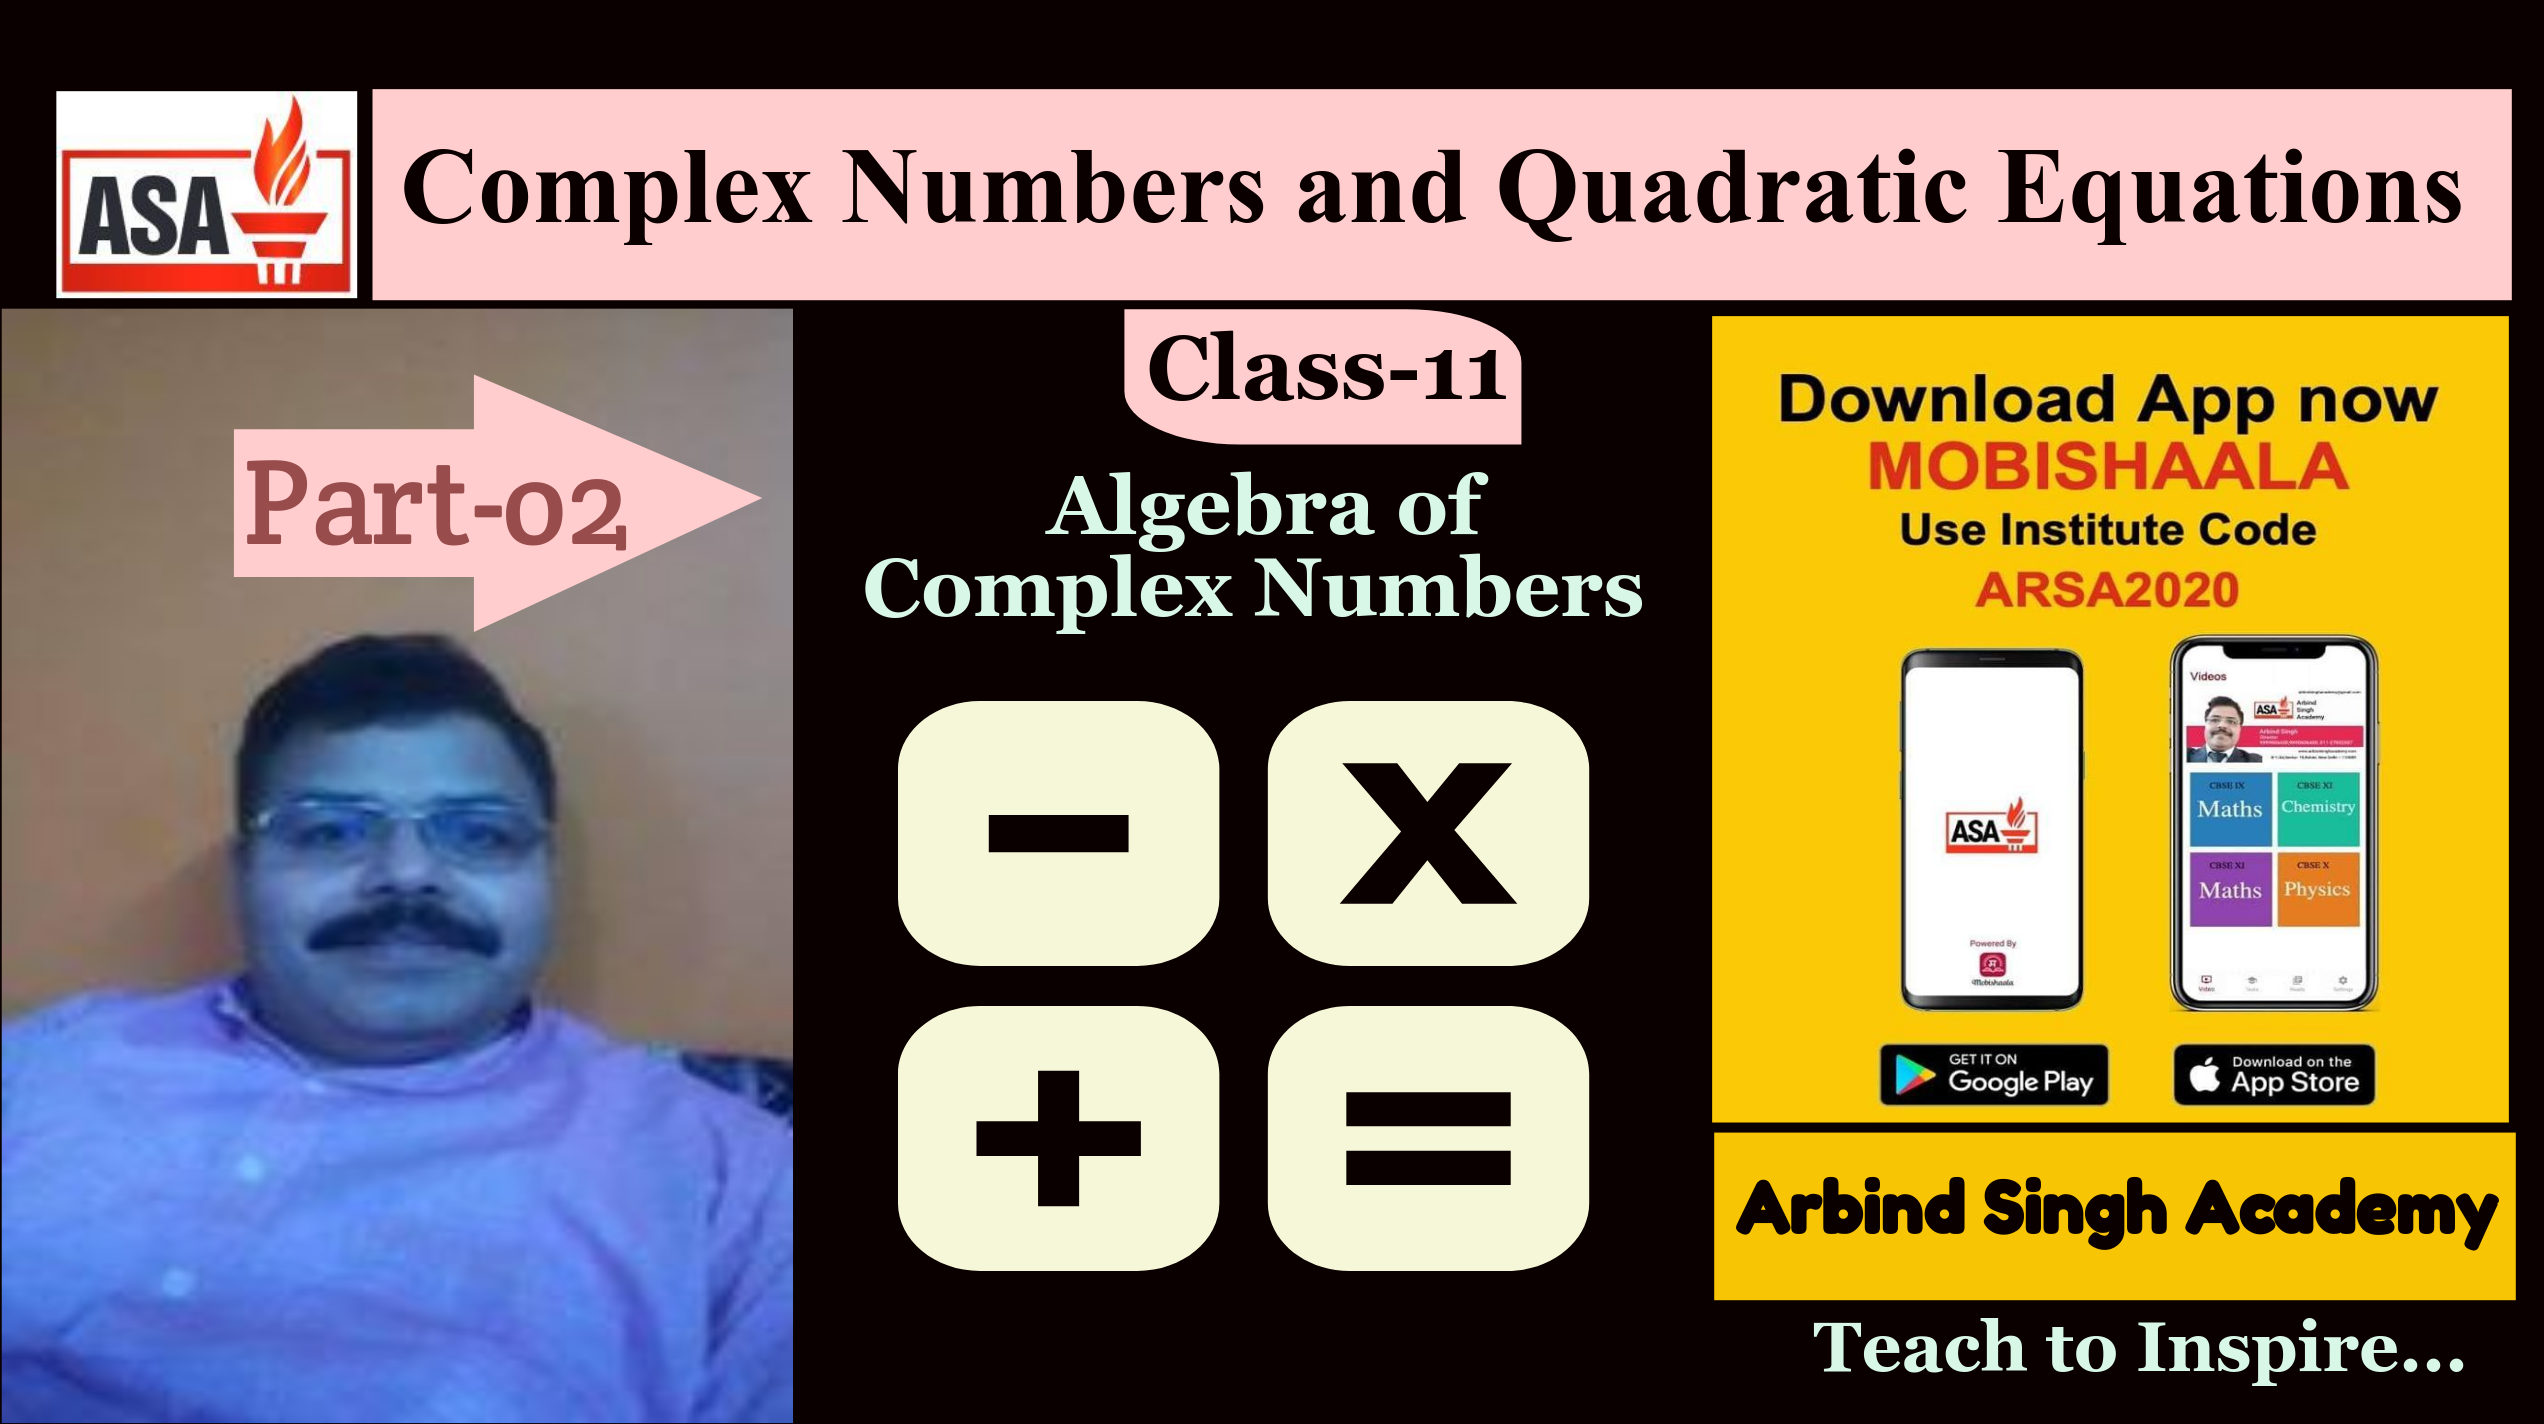 Complex Numbers and Qaudratic Equations for Class-11 : Part-02